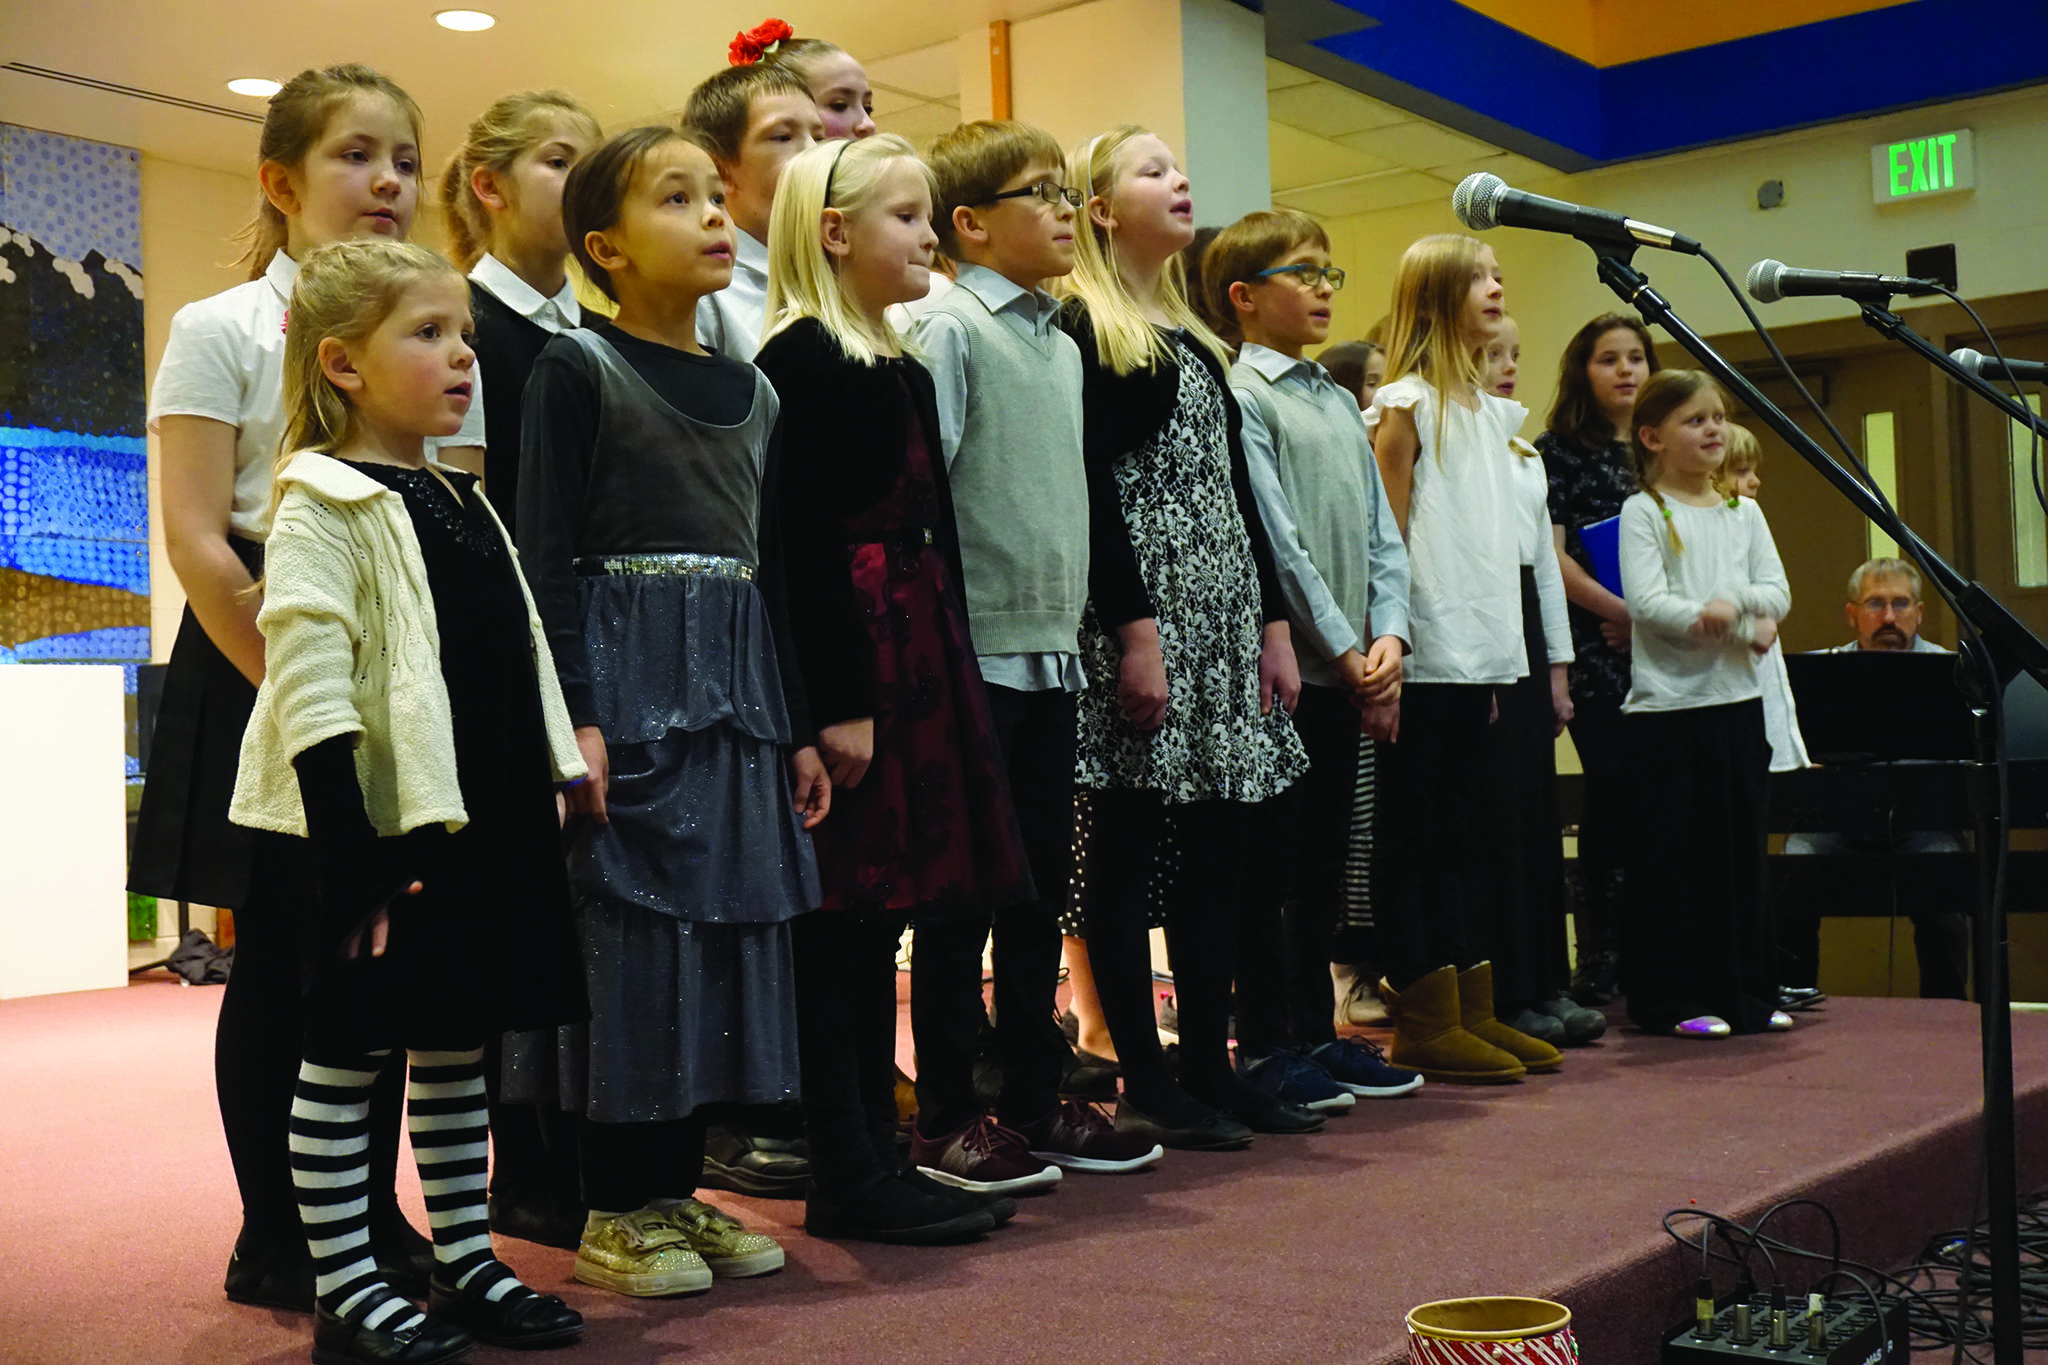 Children with the Harbor School of Music sing at the Homer Nutcracker Faire on Sunday, Dec. 8, 2019, at Homer High School in Homer, Alaska. (Photo by Michael Armstrong/Homer News)